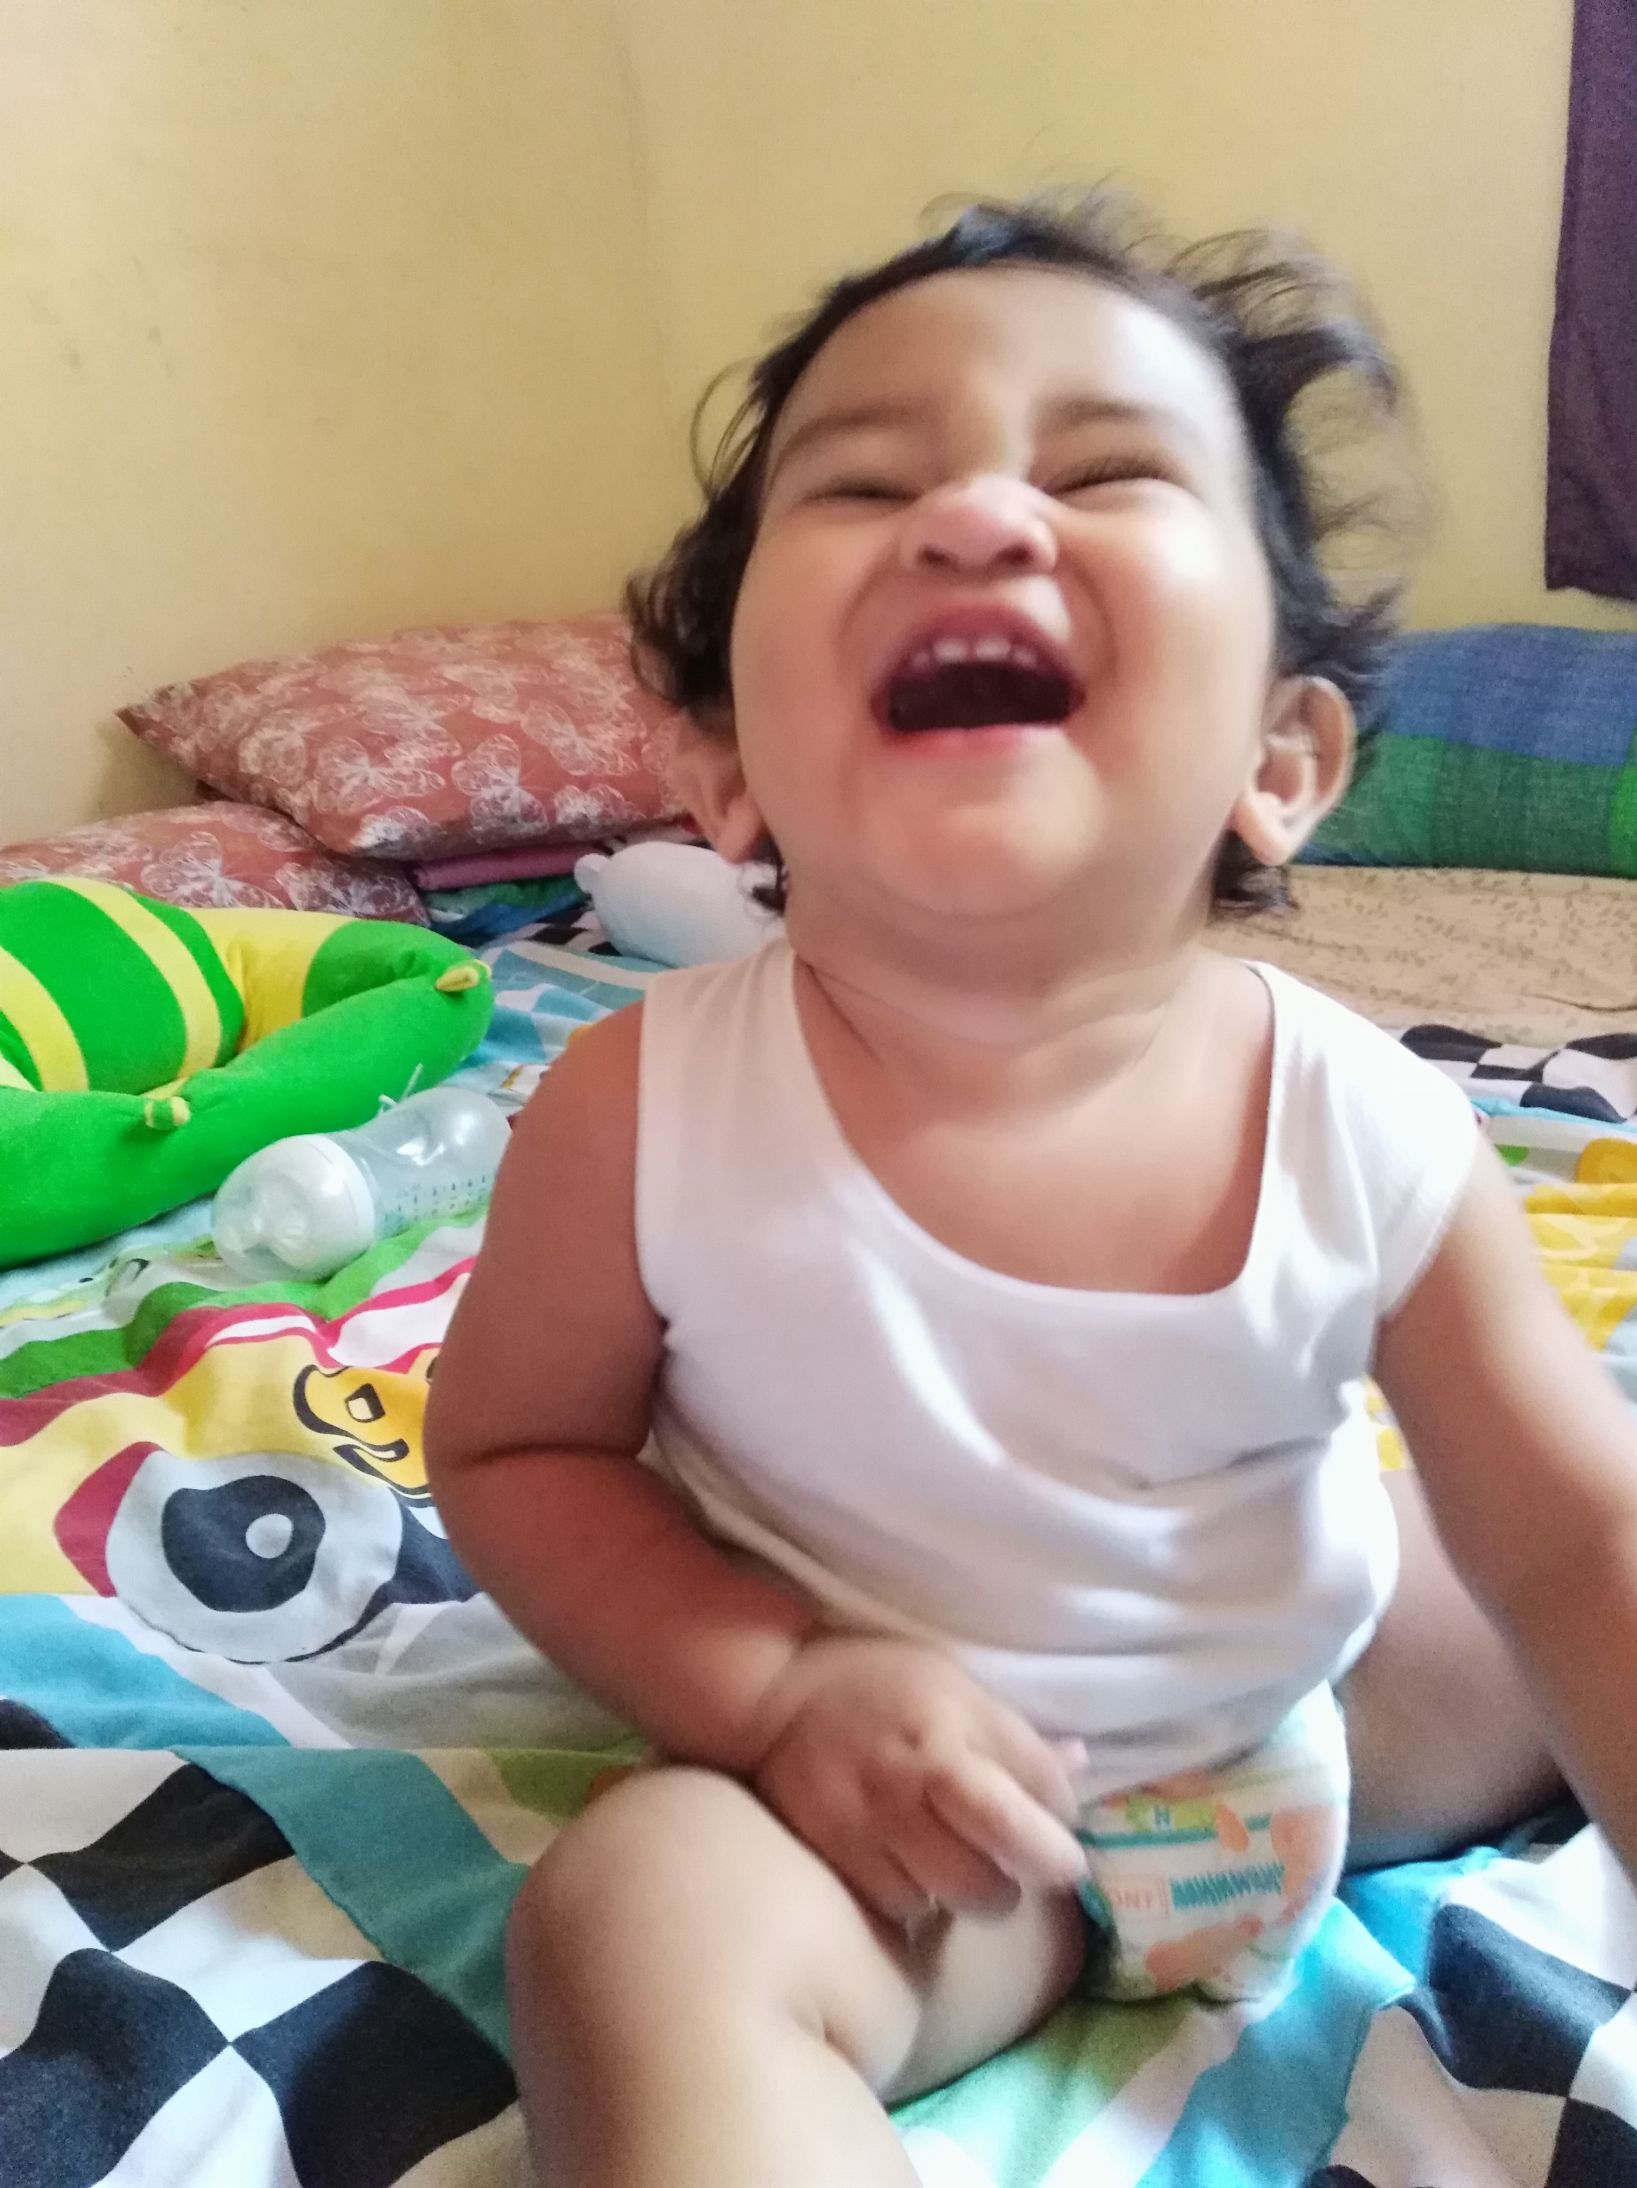 High Quality With less lawlaw pampers my baby laugh out loud Blank Meme Template